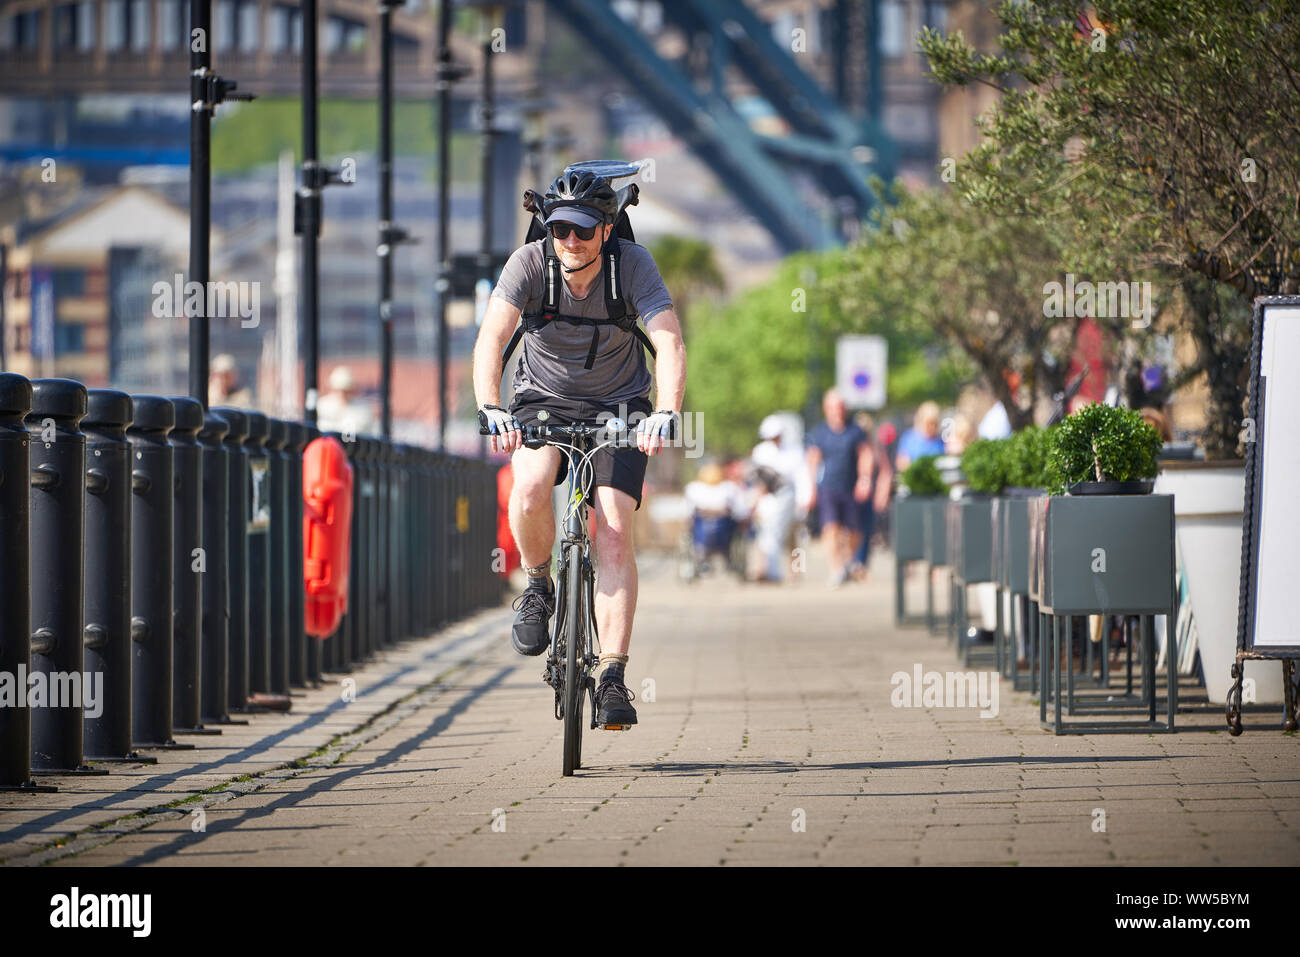 NEWCASTLE UPON TYNE, ENGLAND, UK - MAY 08, 2018: A cyclists riding along Newcastle Quayside on a sunny day. Stock Photo